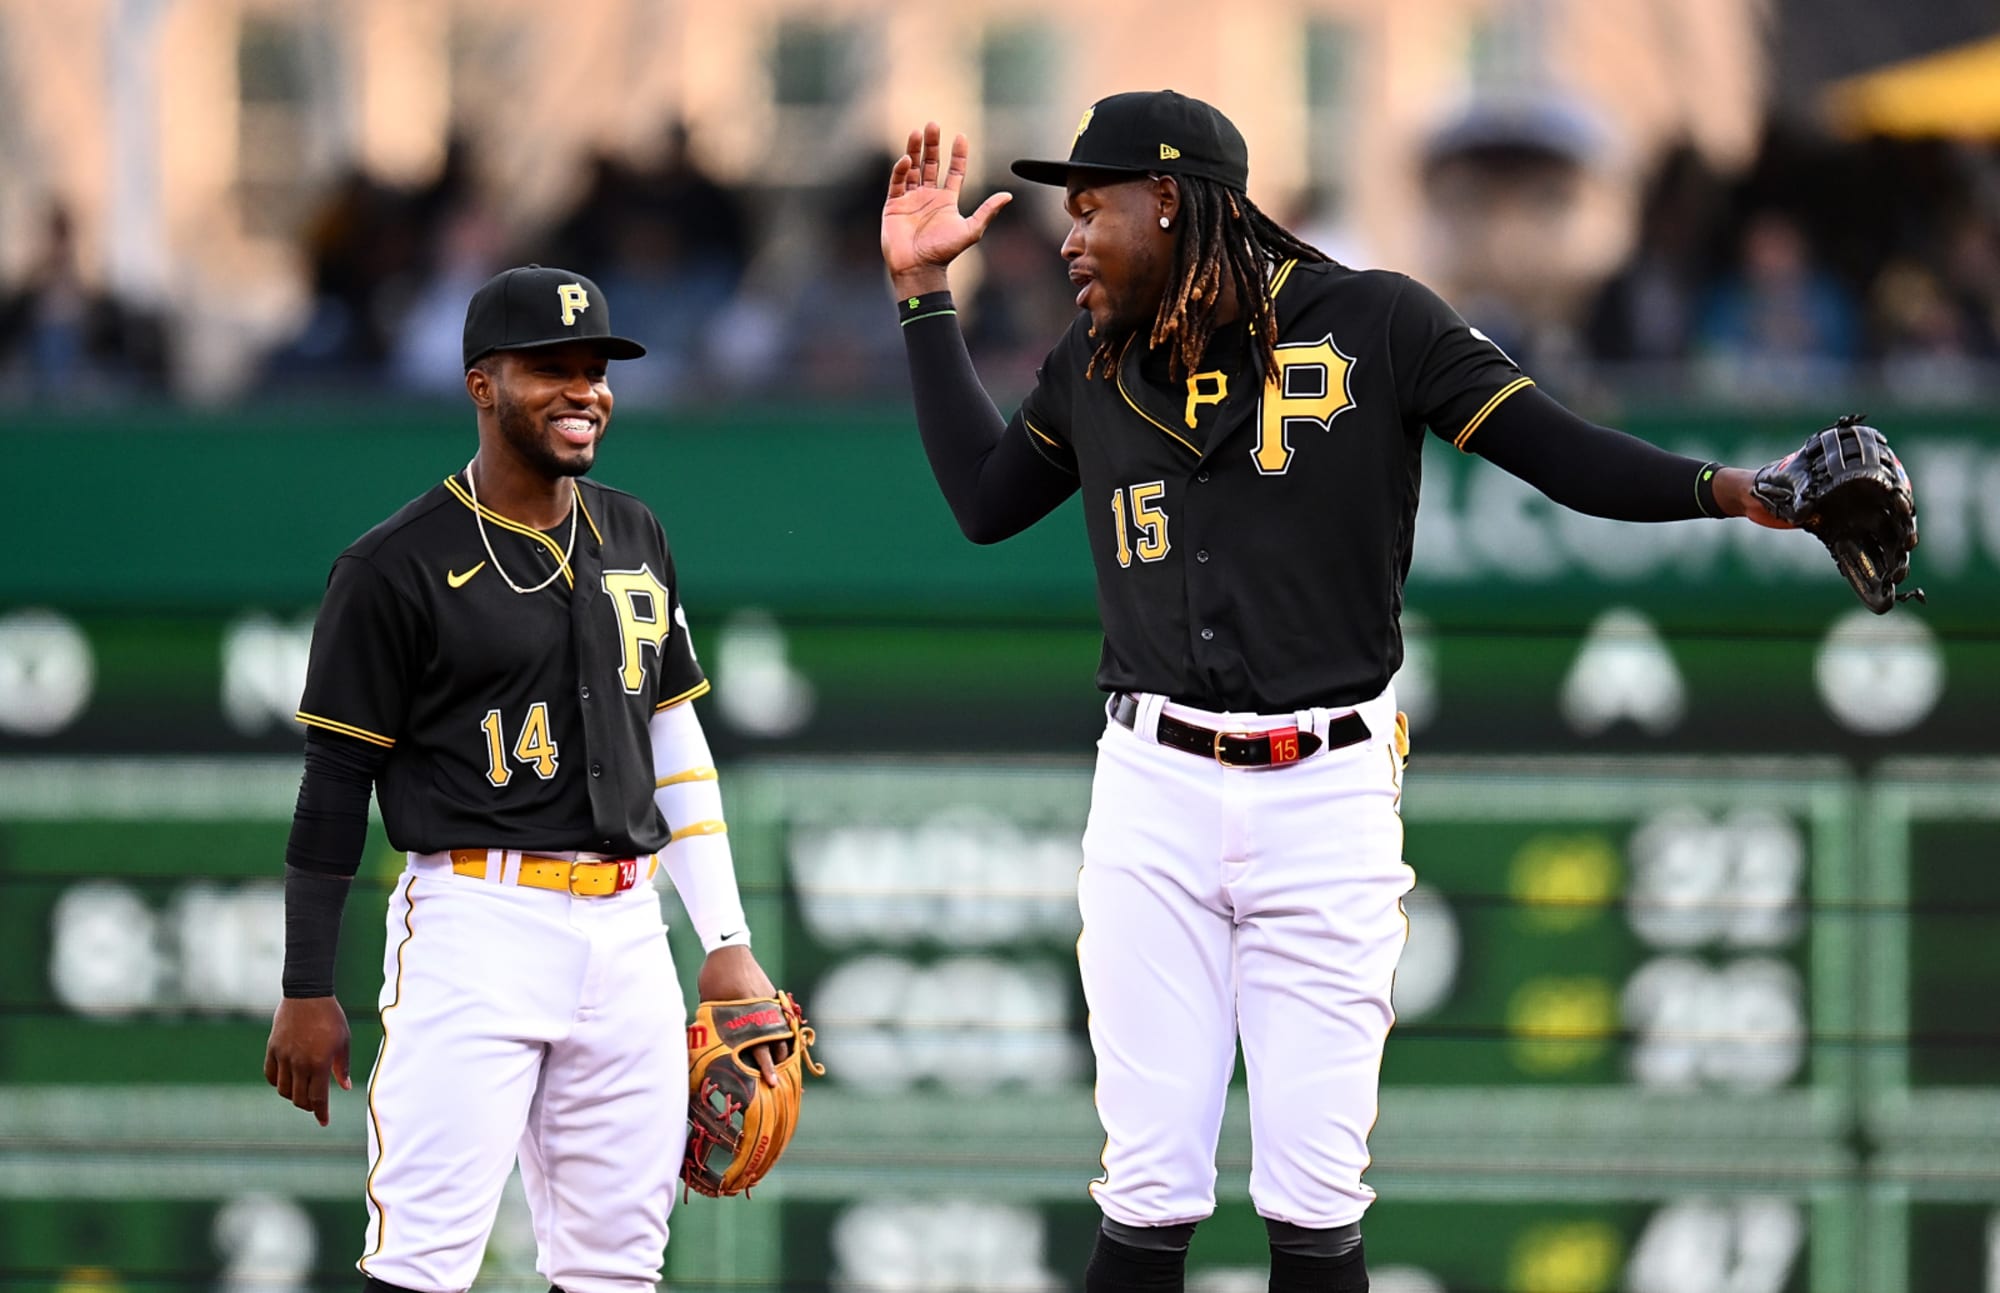 5 fantasy baseball waiver wire replacements for Pirates SS Oneil Cruz -  Page 3